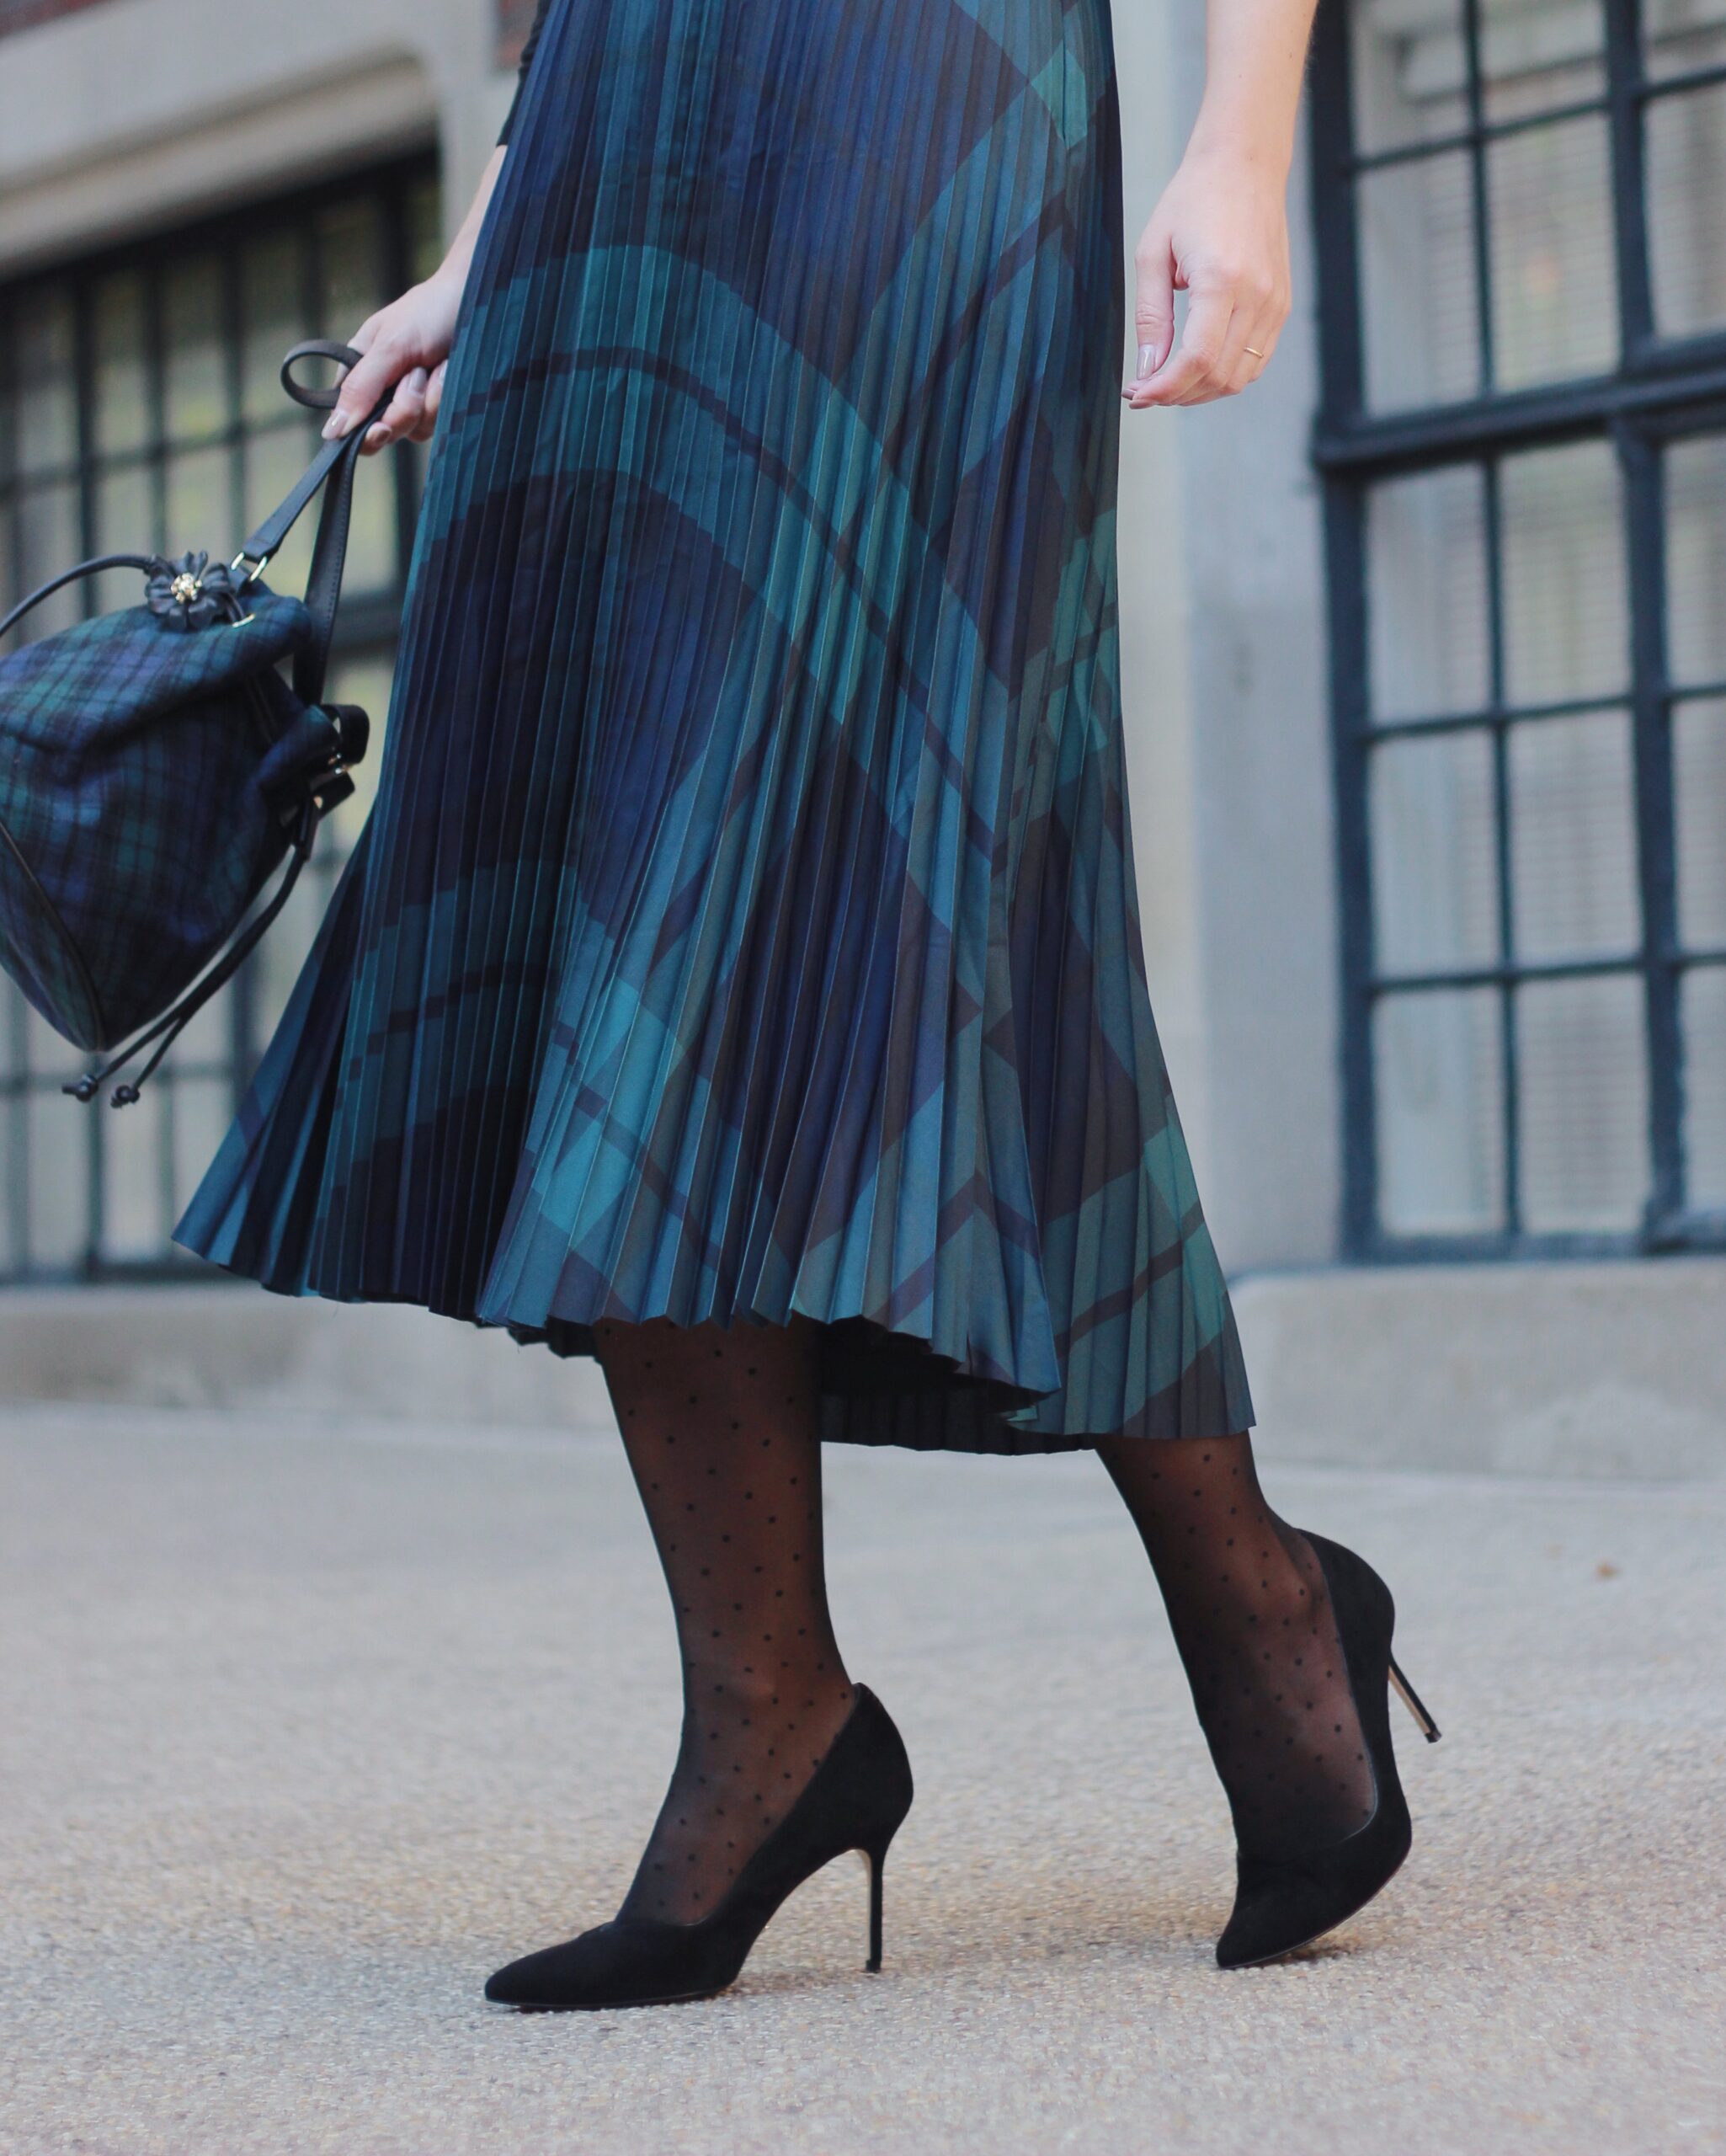 THE PERFECT PUMPS WITH SARAH FLINT – The Steele Maiden